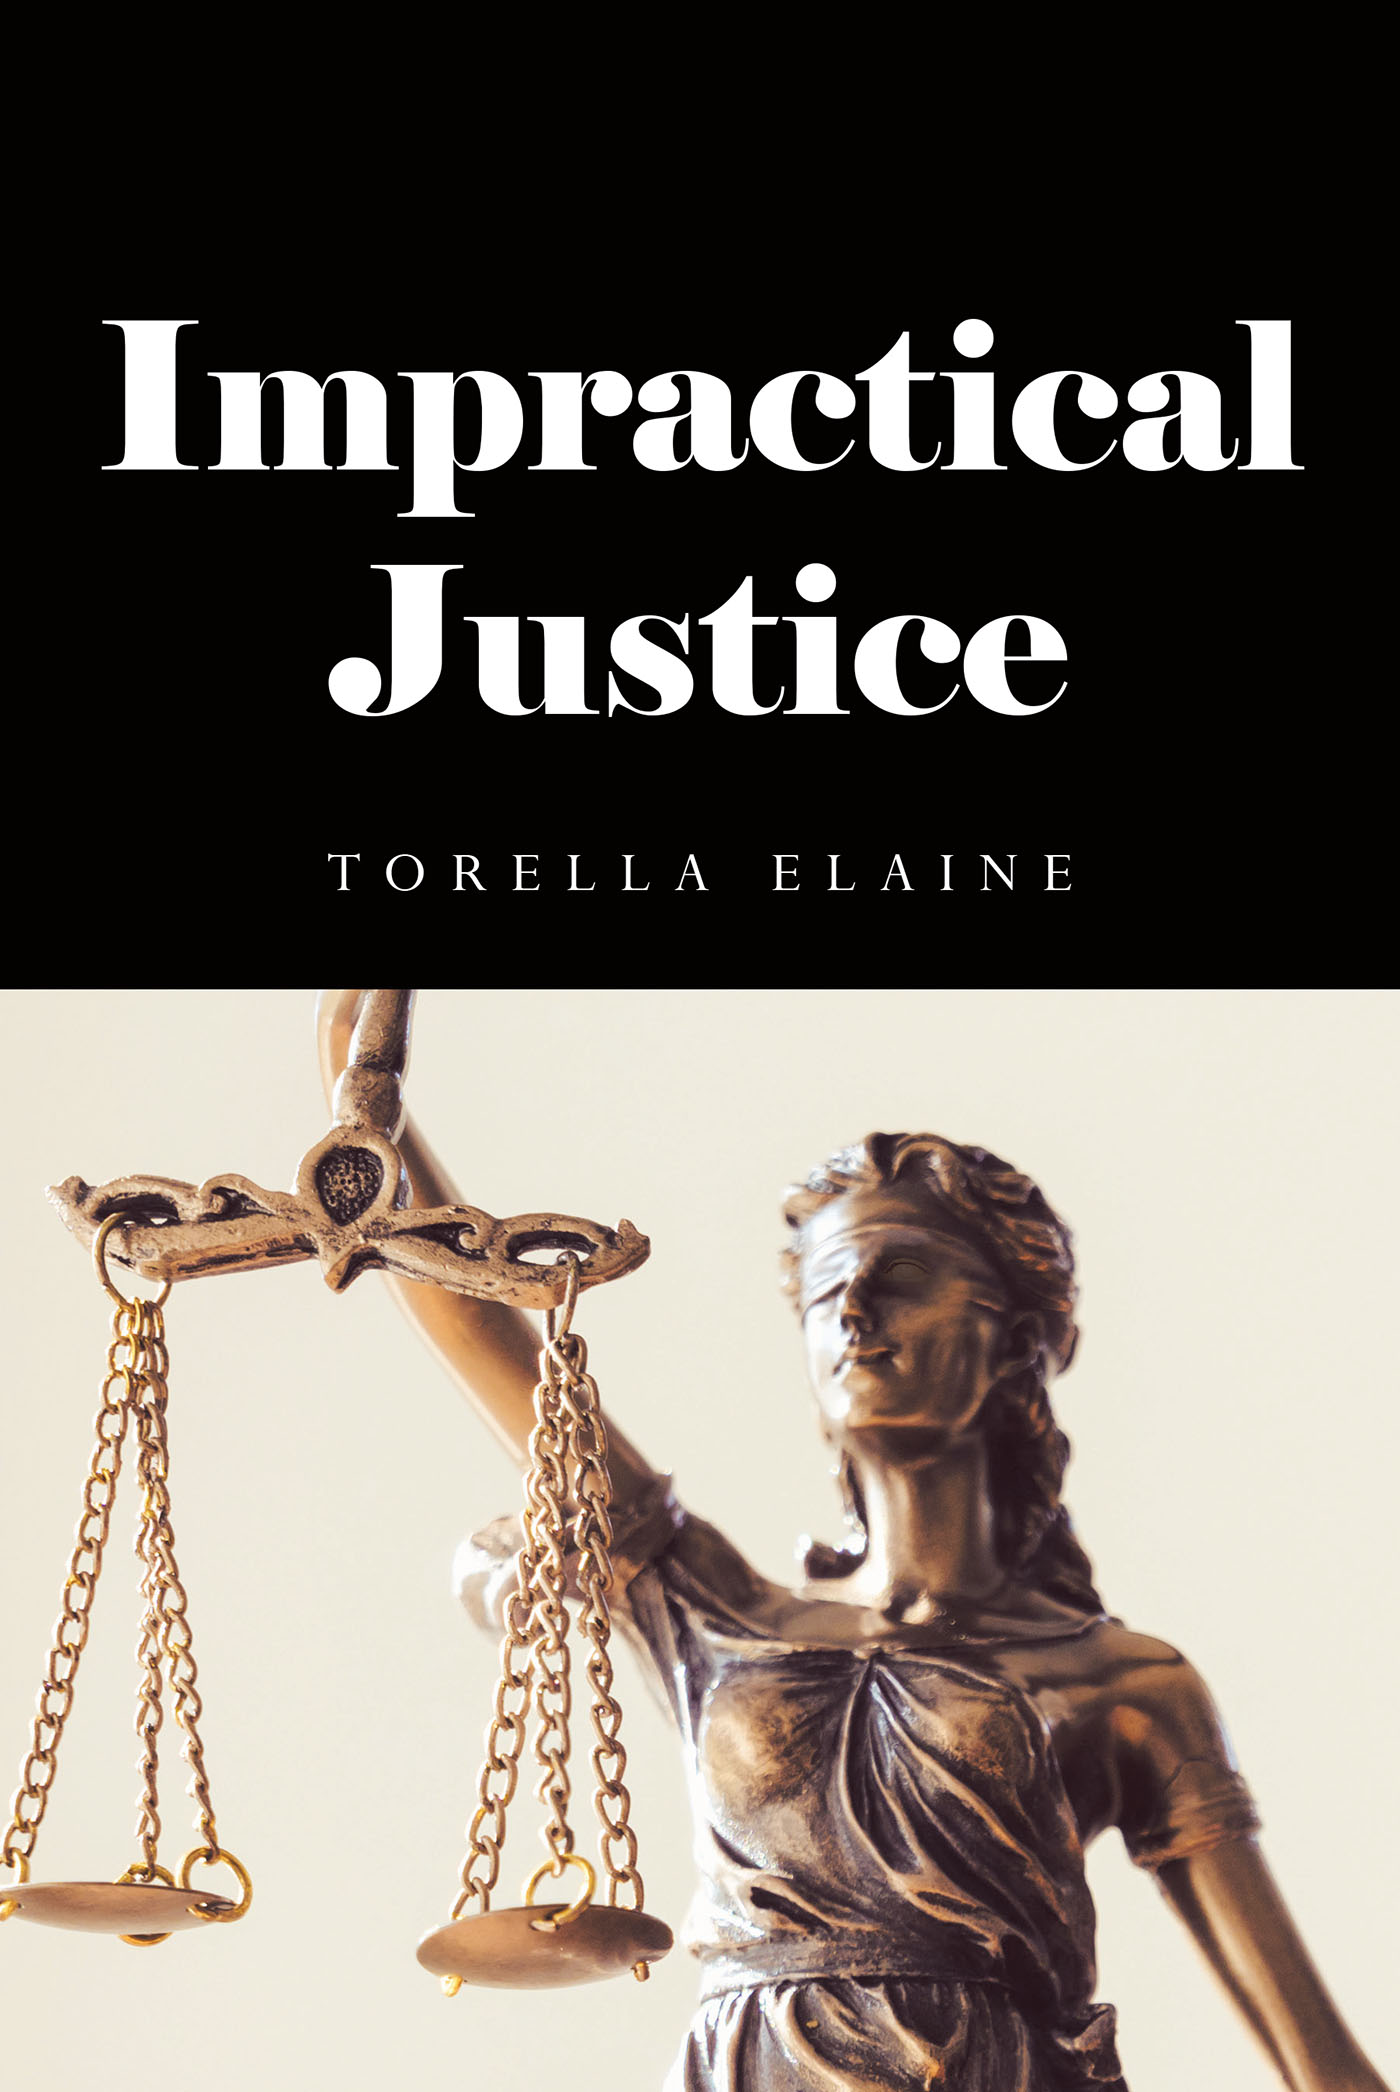 Author Torella Elaine’s New Book, "Impractical Justice," is a Poignant Work Based on the Flawed and Complex Justice System in the State of New Jersey